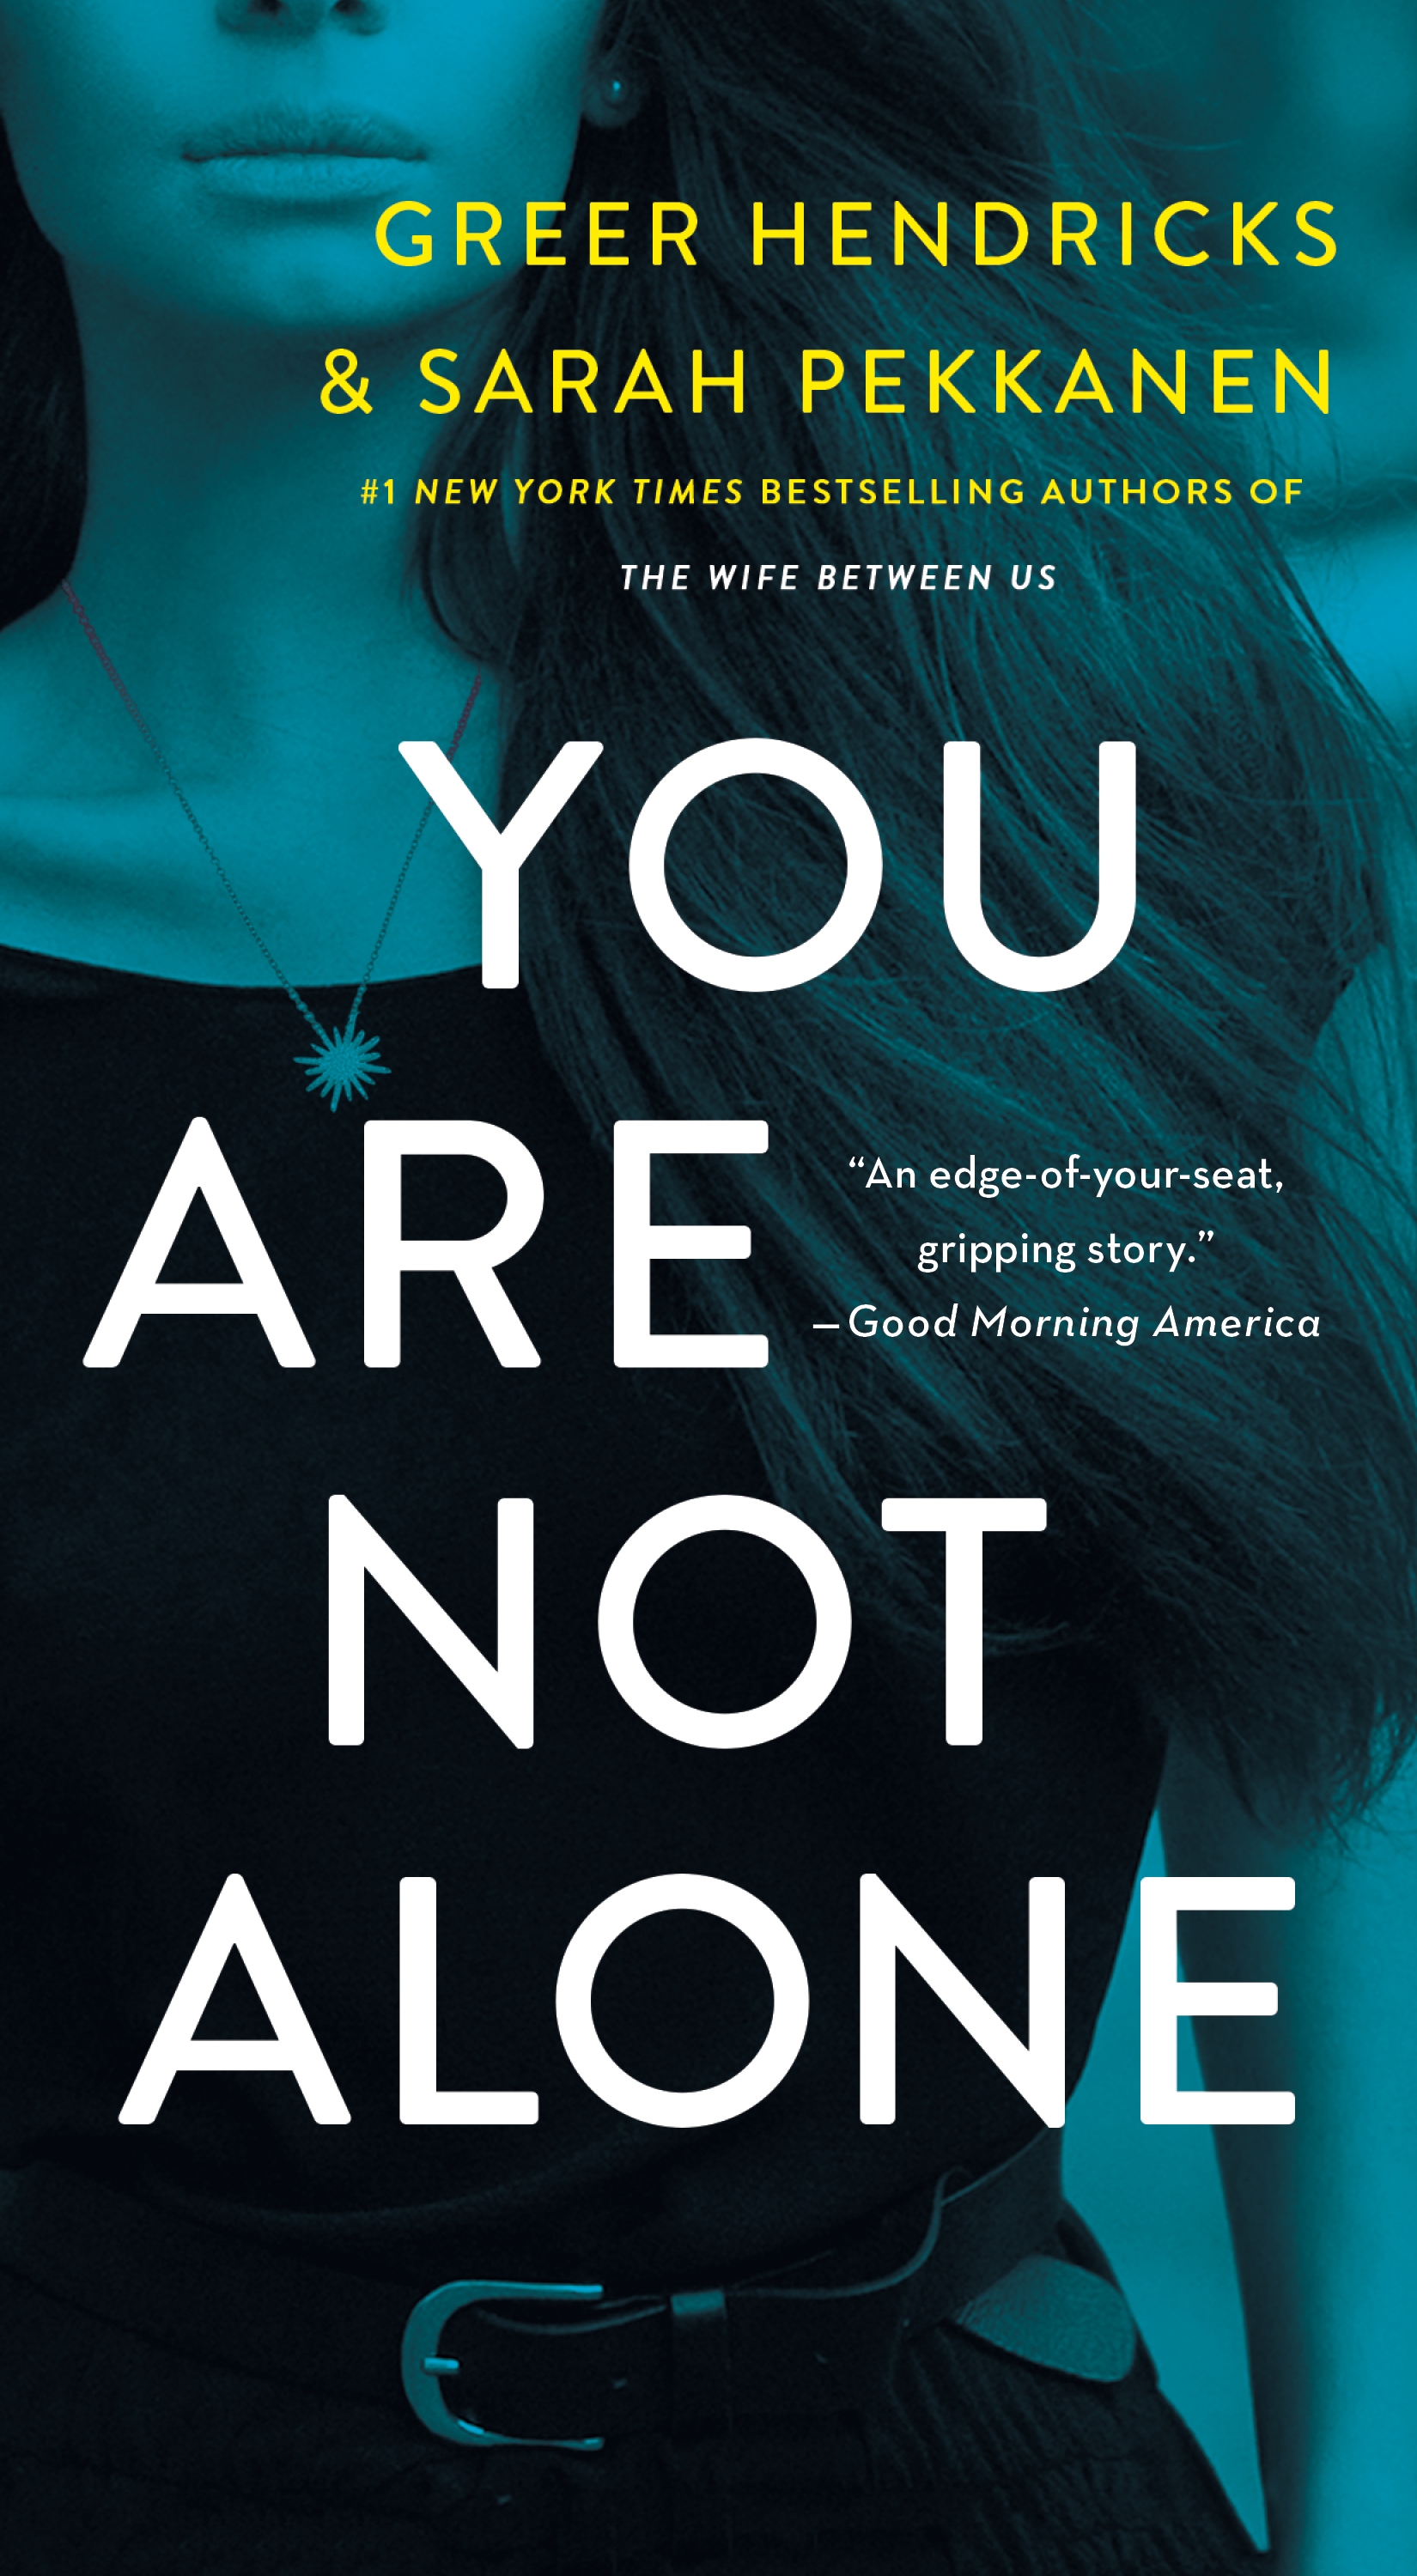 You are not alone cover image